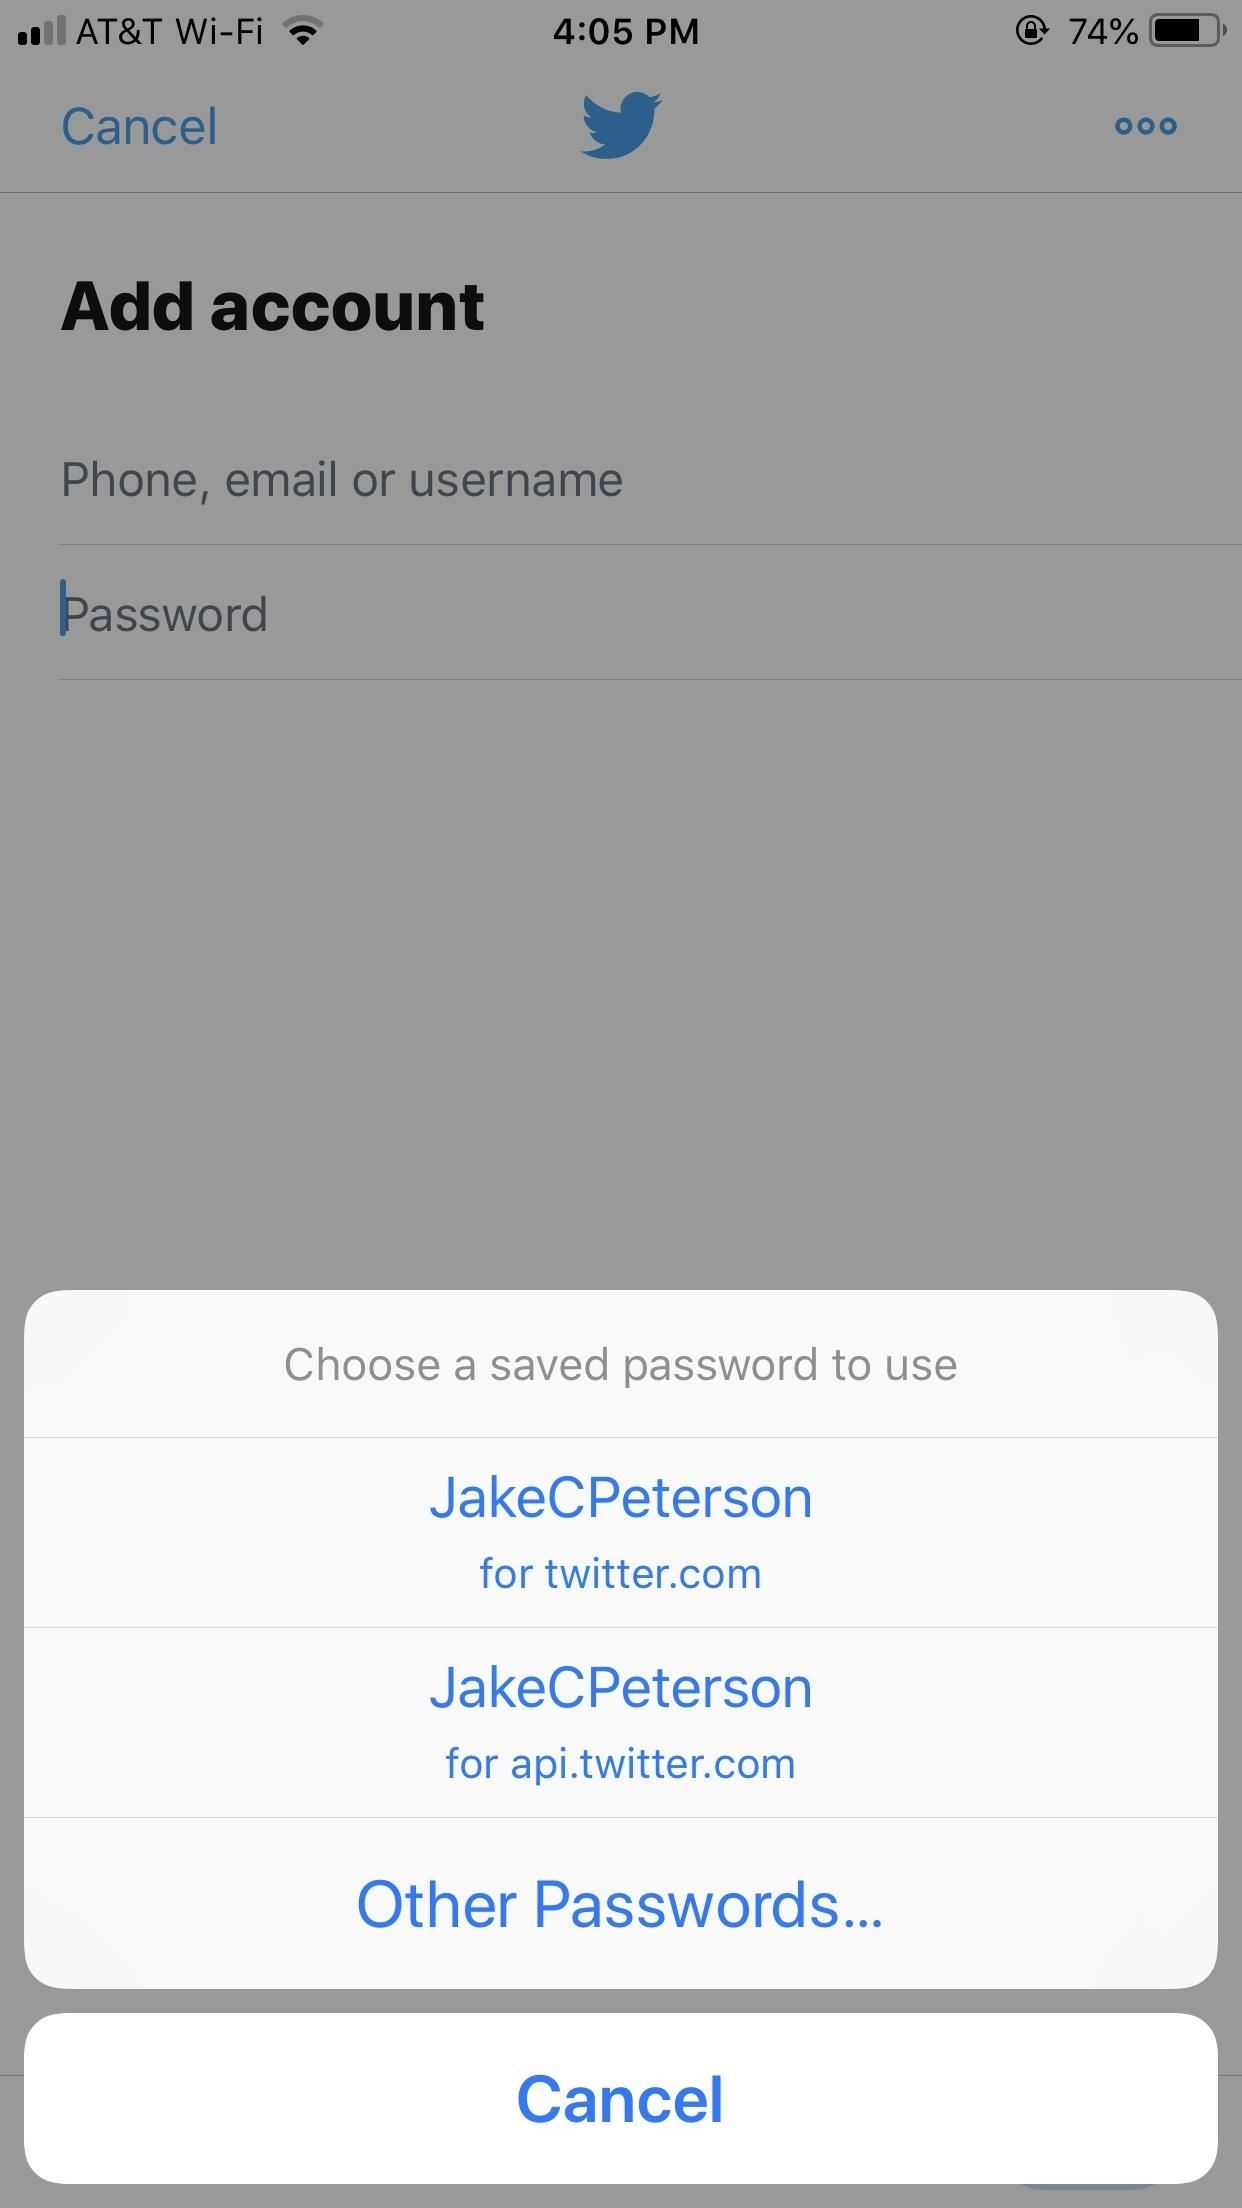 How to Create, AutoFill & Store Strong Passwords Automatically for Websites & Apps in iOS 12